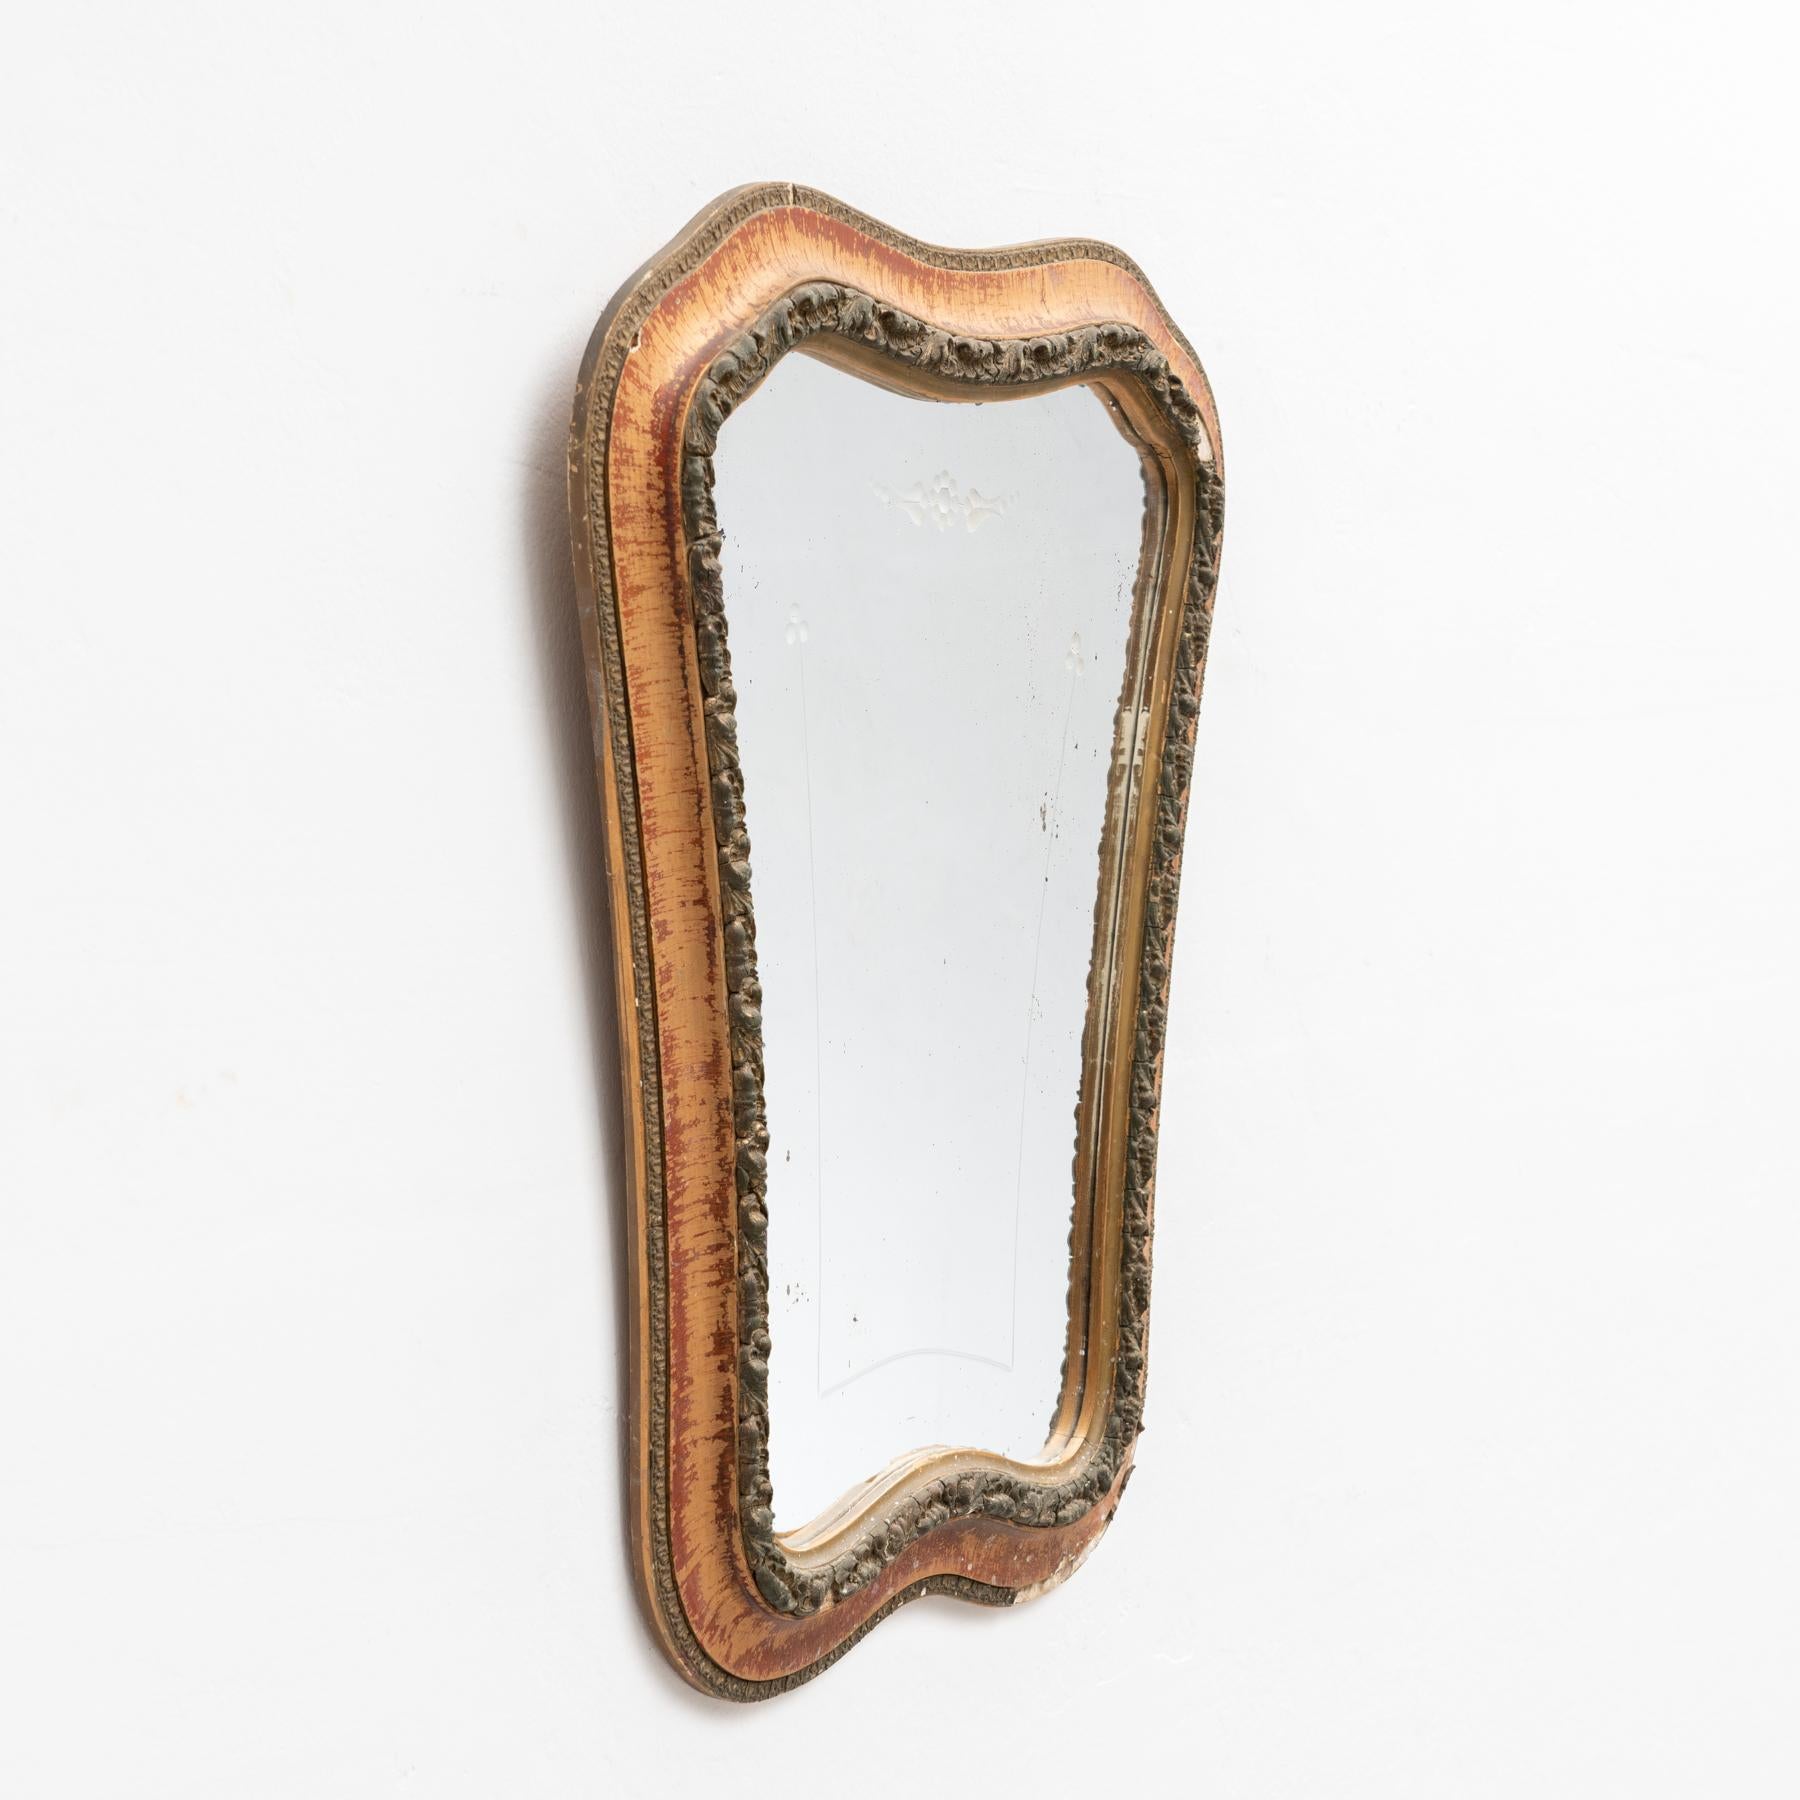 Handcrafted mid-century wood mirror made in Spain, circa 1950.

Add a touch of vintage elegance to your home with this handcrafted mid-century wood mirror, made in Spain circa 1950. This beautifully crafted piece showcases the warmth and charm of